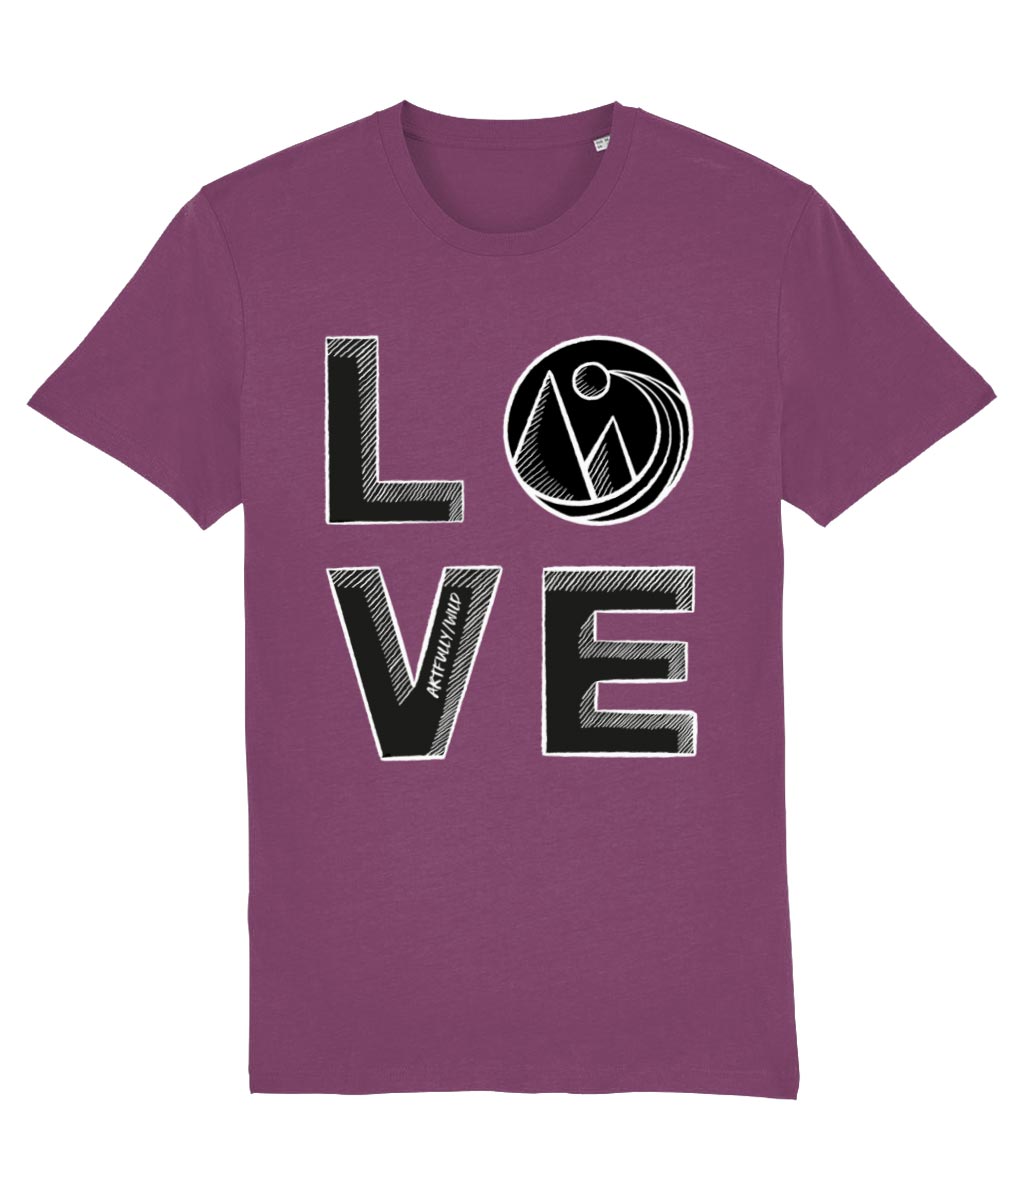 'LOVE' Print on Mauve Organic T-Shirt. Unisex/Women/Men. Sustainable Clothing. Original Sketched Illustration by Artfully/Wild. Printed with water-based inks.